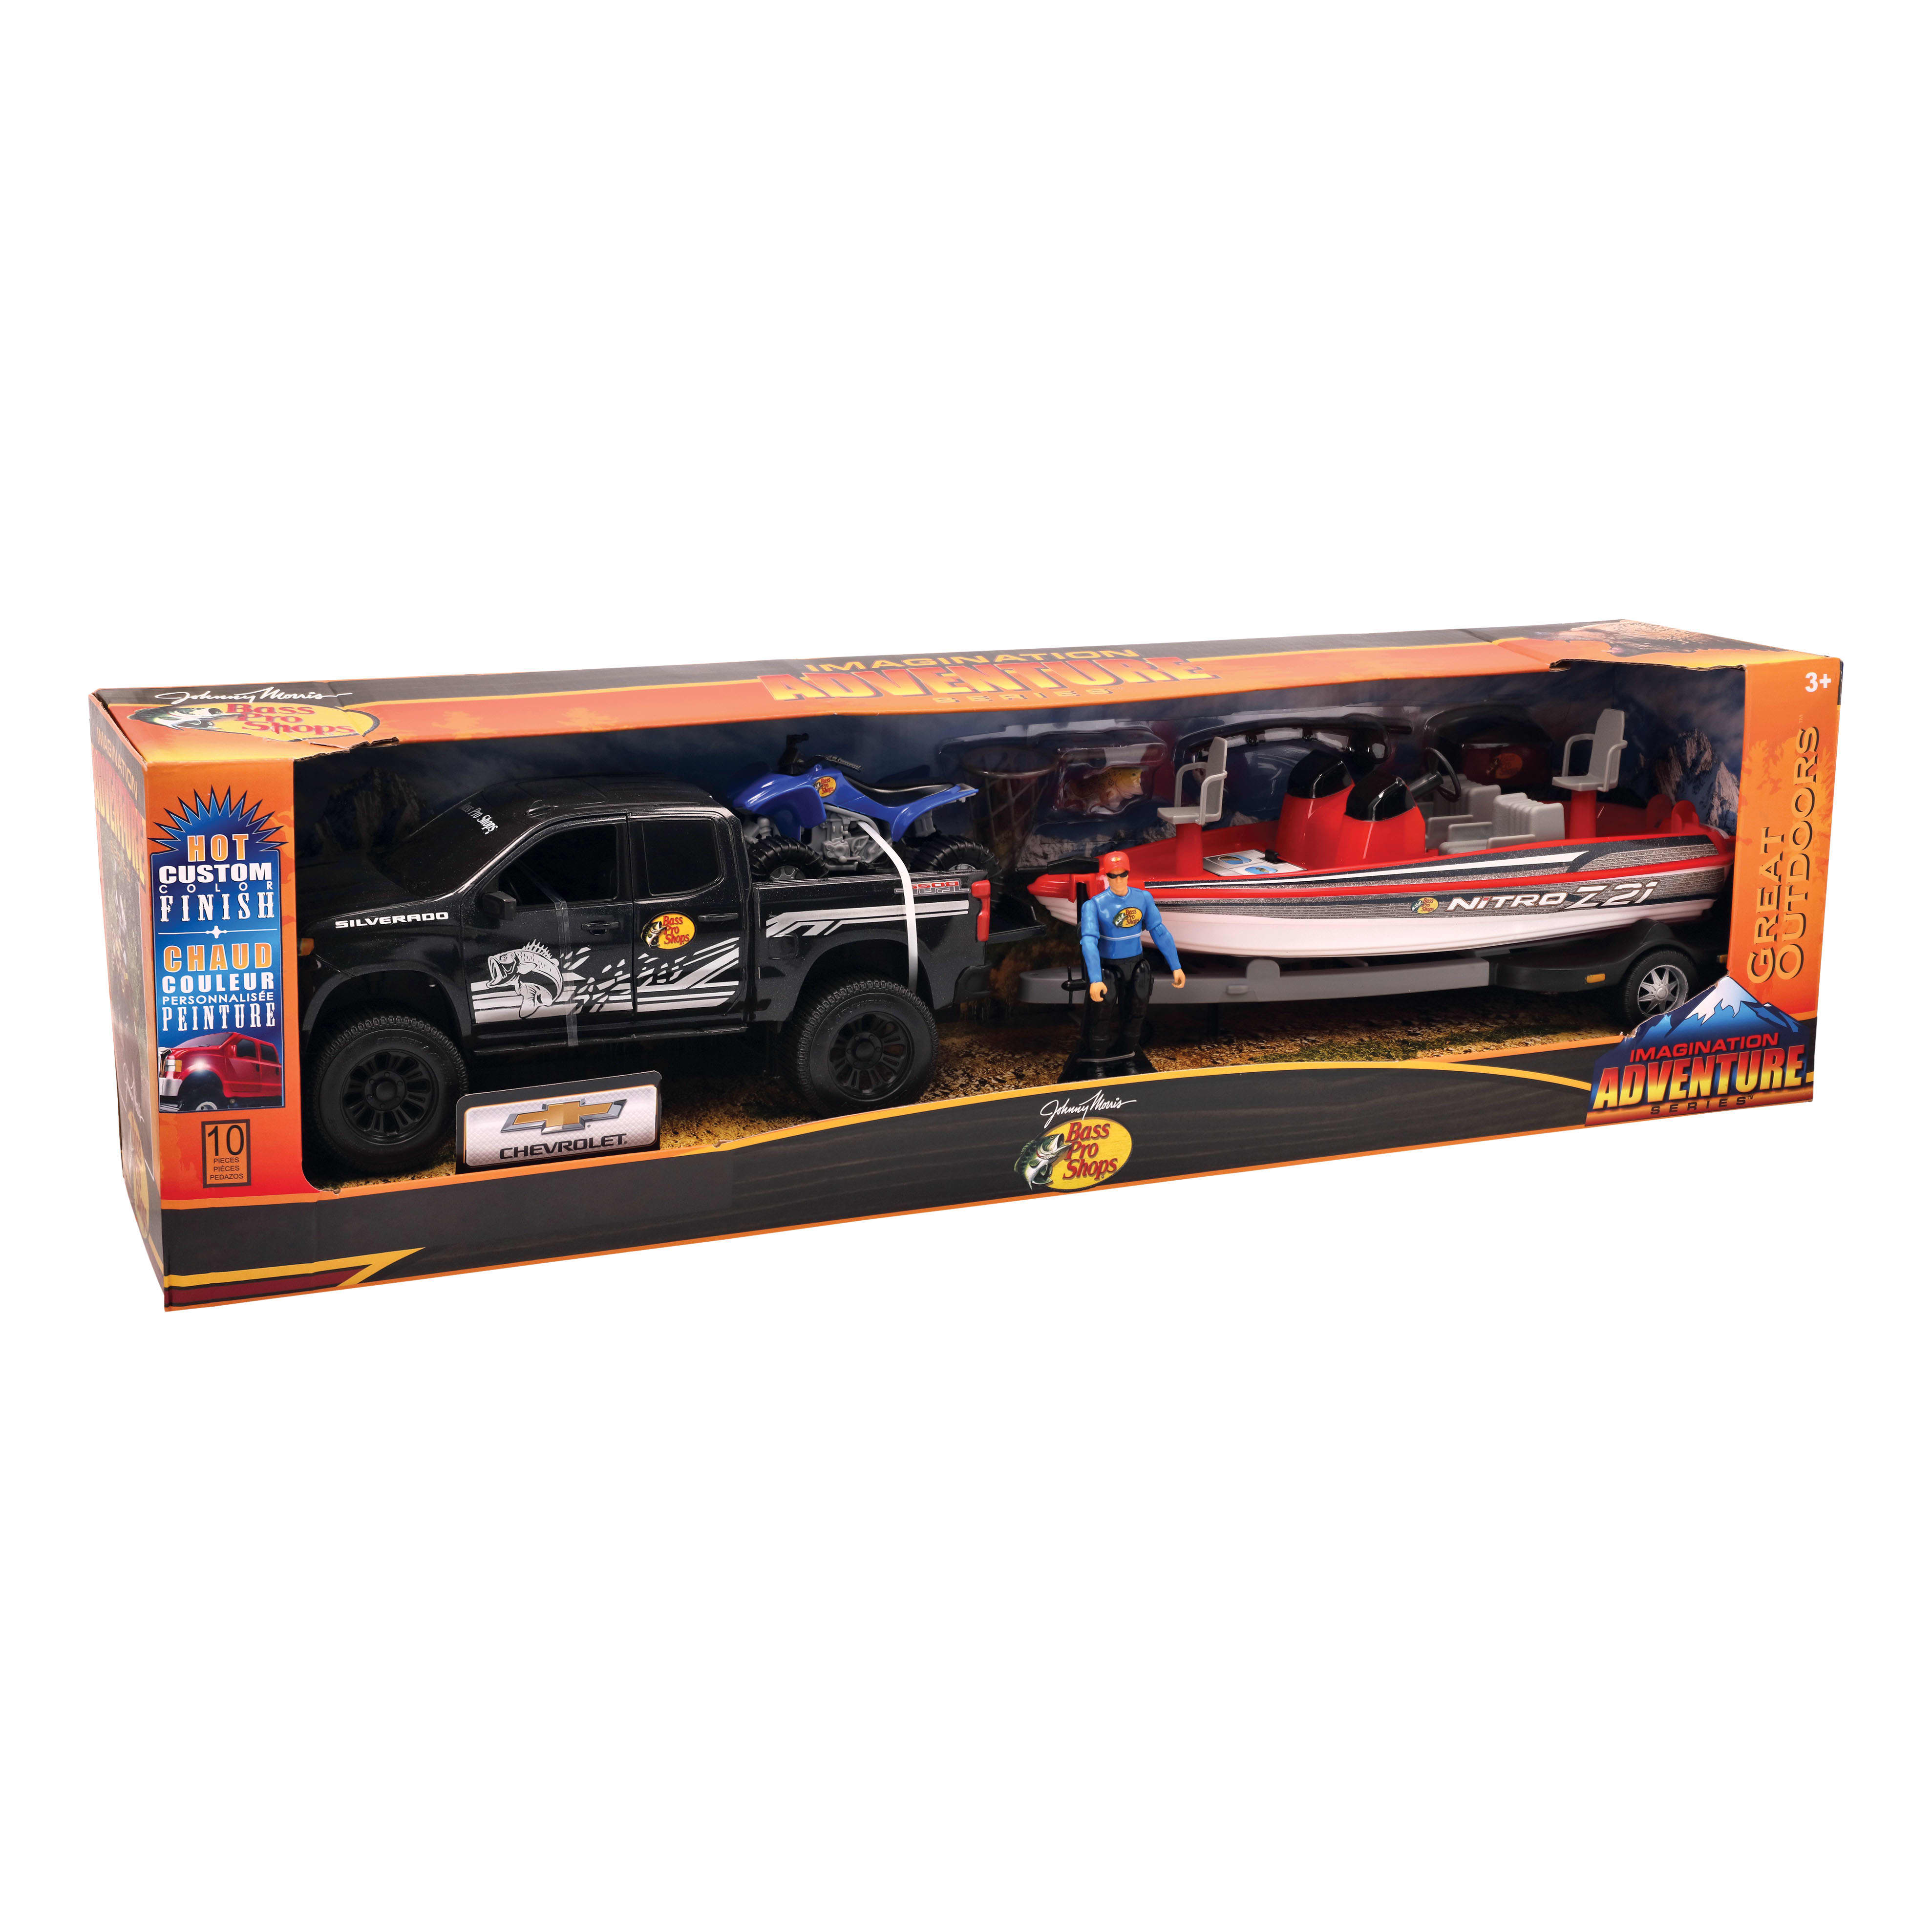 Bass Pro Shops Imagination Adventure Chevy Silverado with Bass Boat